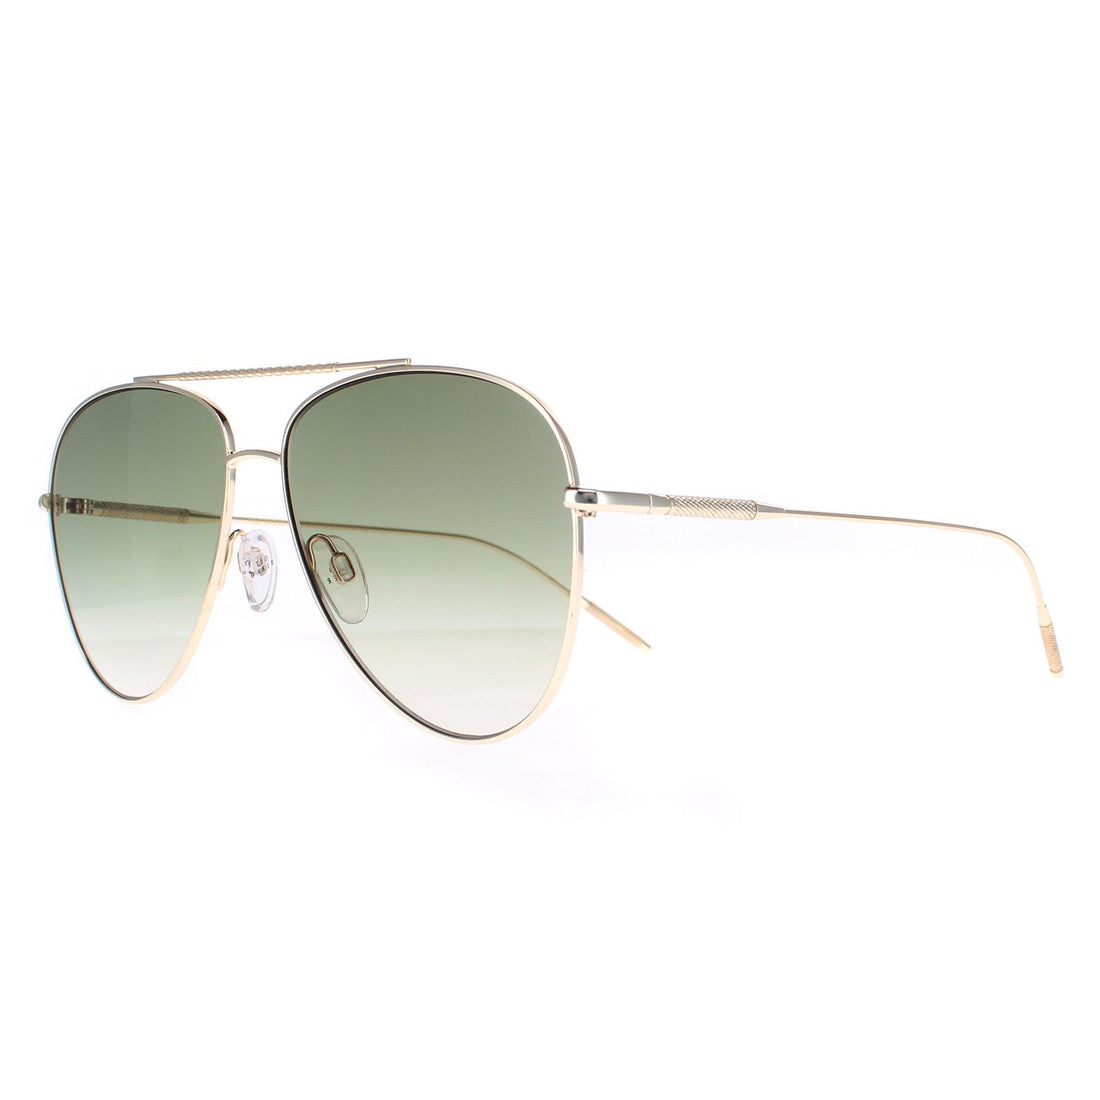 Ted Baker Sunglasses TB1625 Sutton 400 Gold Green Gradient